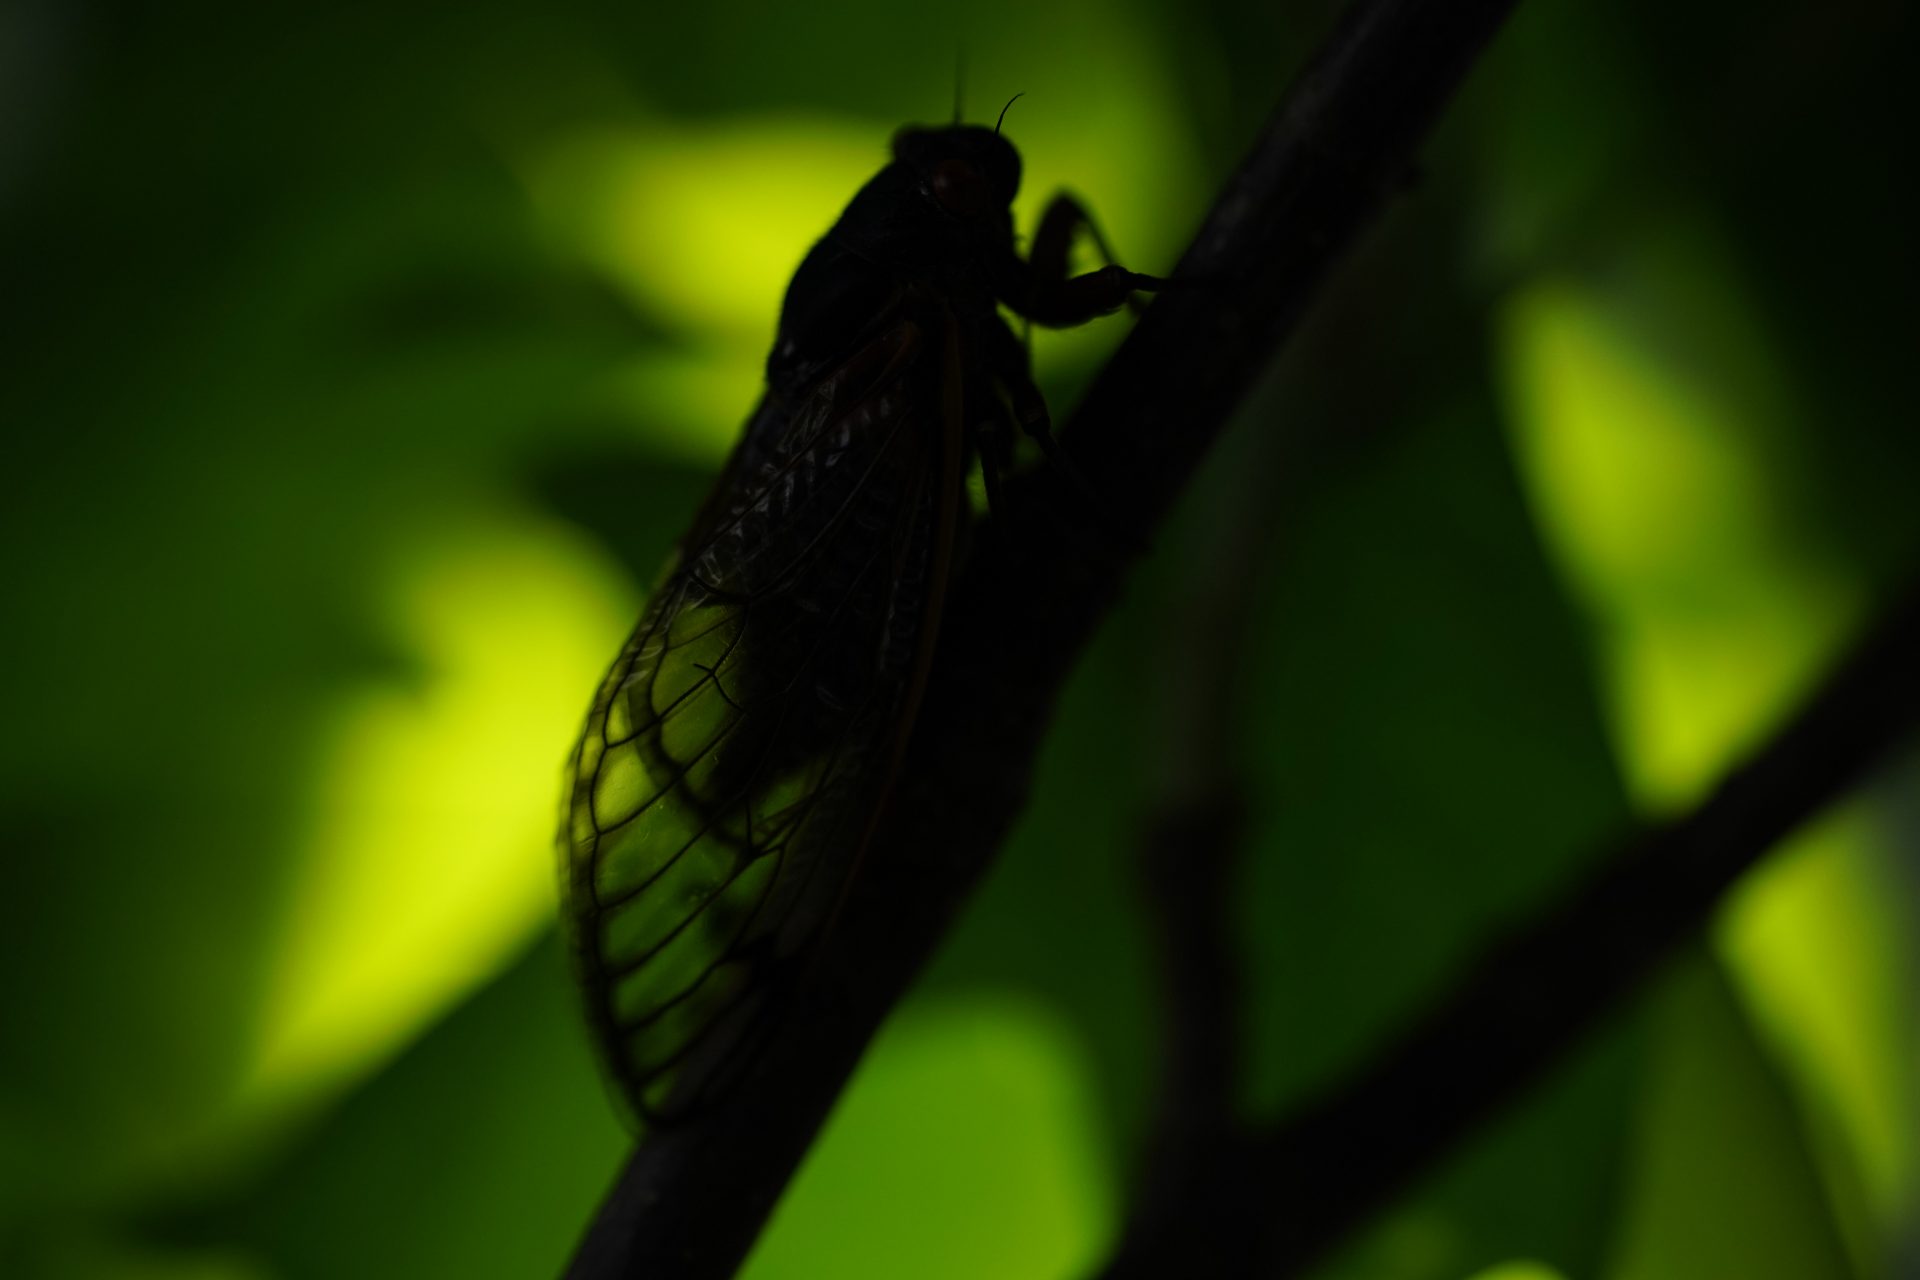 An adult cicada is seen, in Washington, Thursday, May 6, 2021. The cicadas of Brood X, trillions of red-eyed bugs singing loud sci-fi sounding songs, can seem downright creepy. Especially since they come out from underground only ever 17 years.